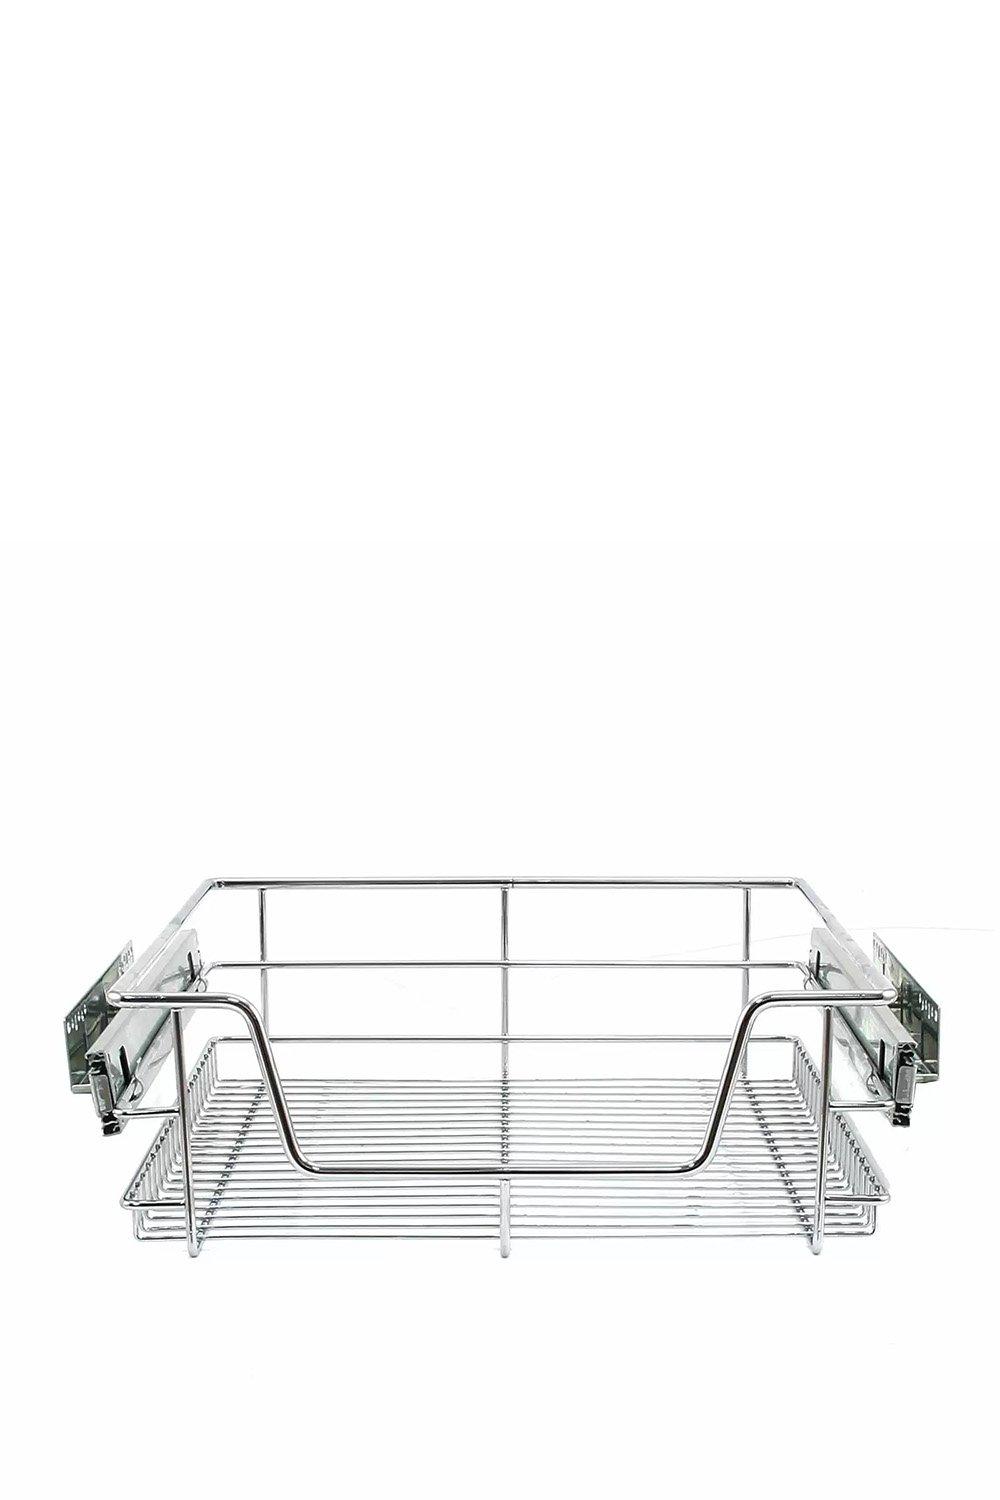 2 x KuKoo Kitchen Pull Out Storage Baskets - 500mm Wide Cabinet